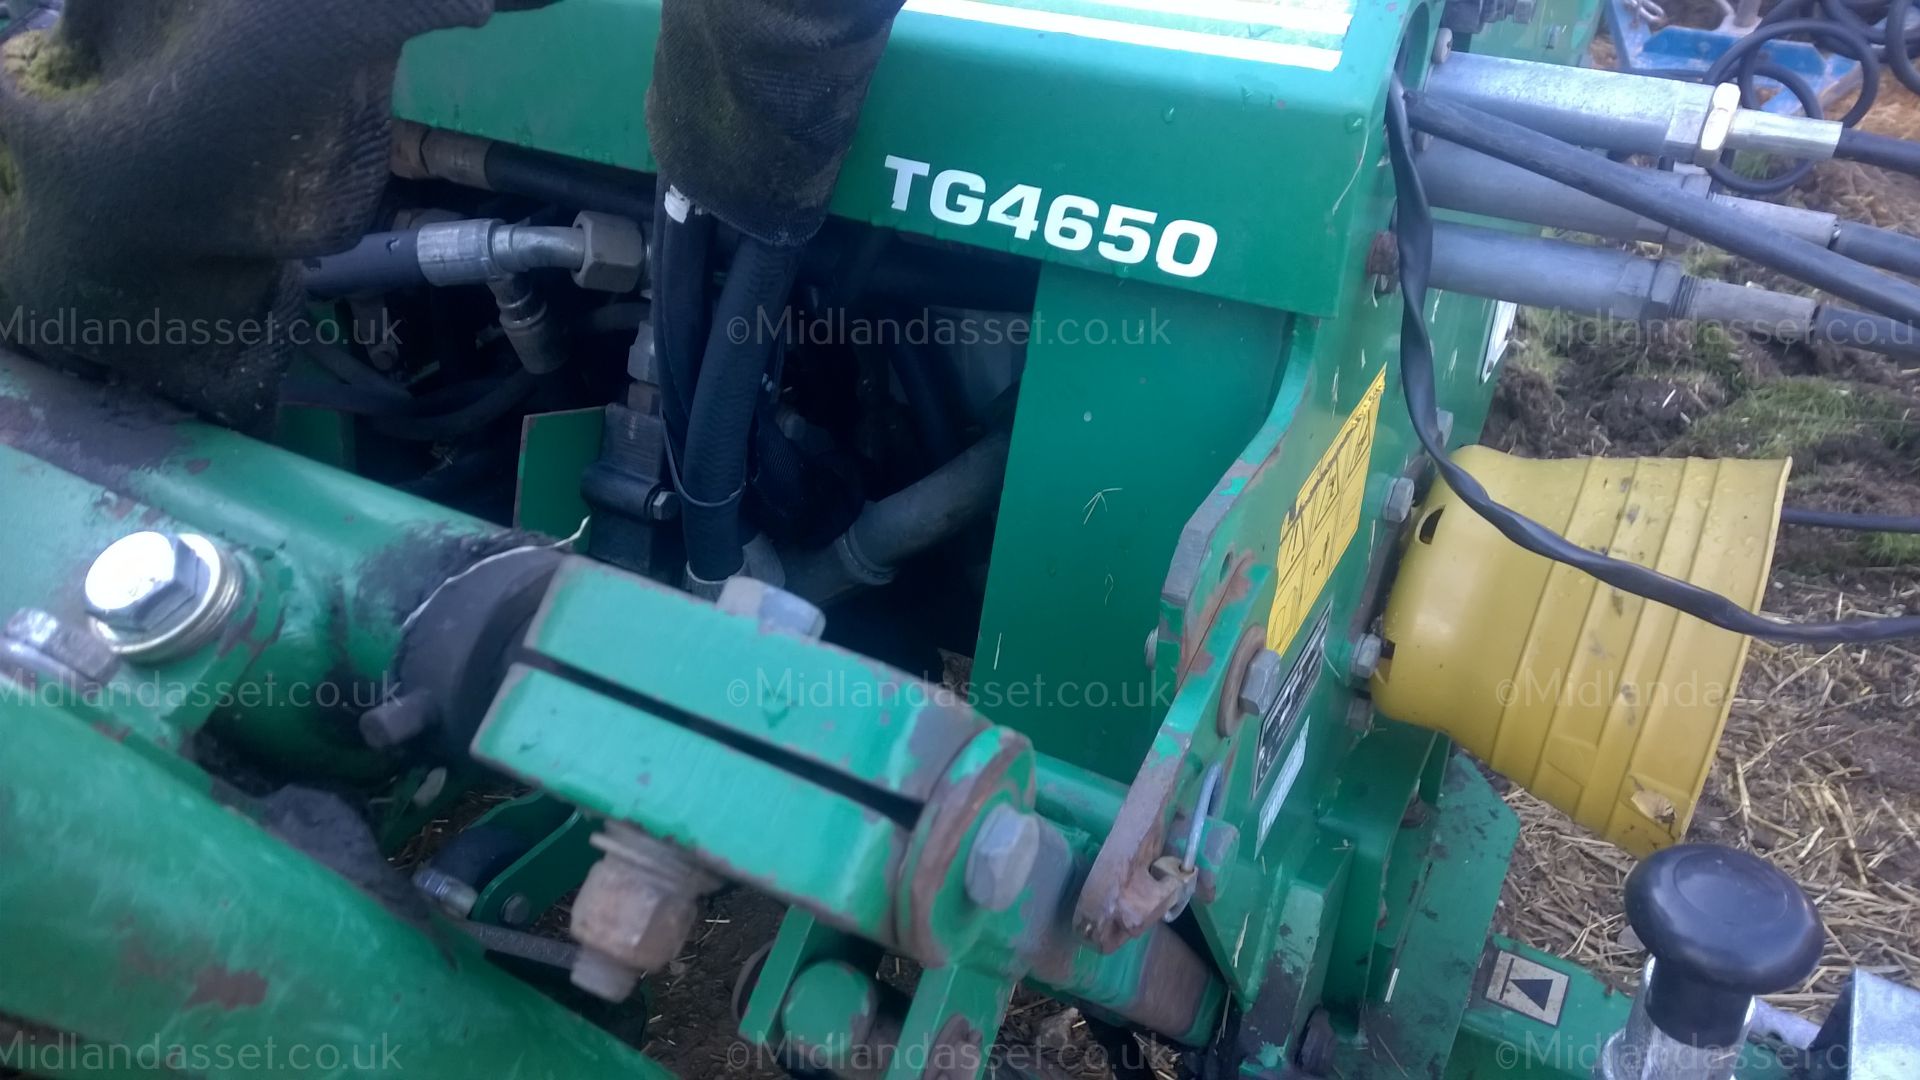 DS - RANSOMES TEXTRON TG 4650 GANG MOWER   EX COUNCIL GOOD WORKING ORDER COLLECTION FROM - Image 2 of 8